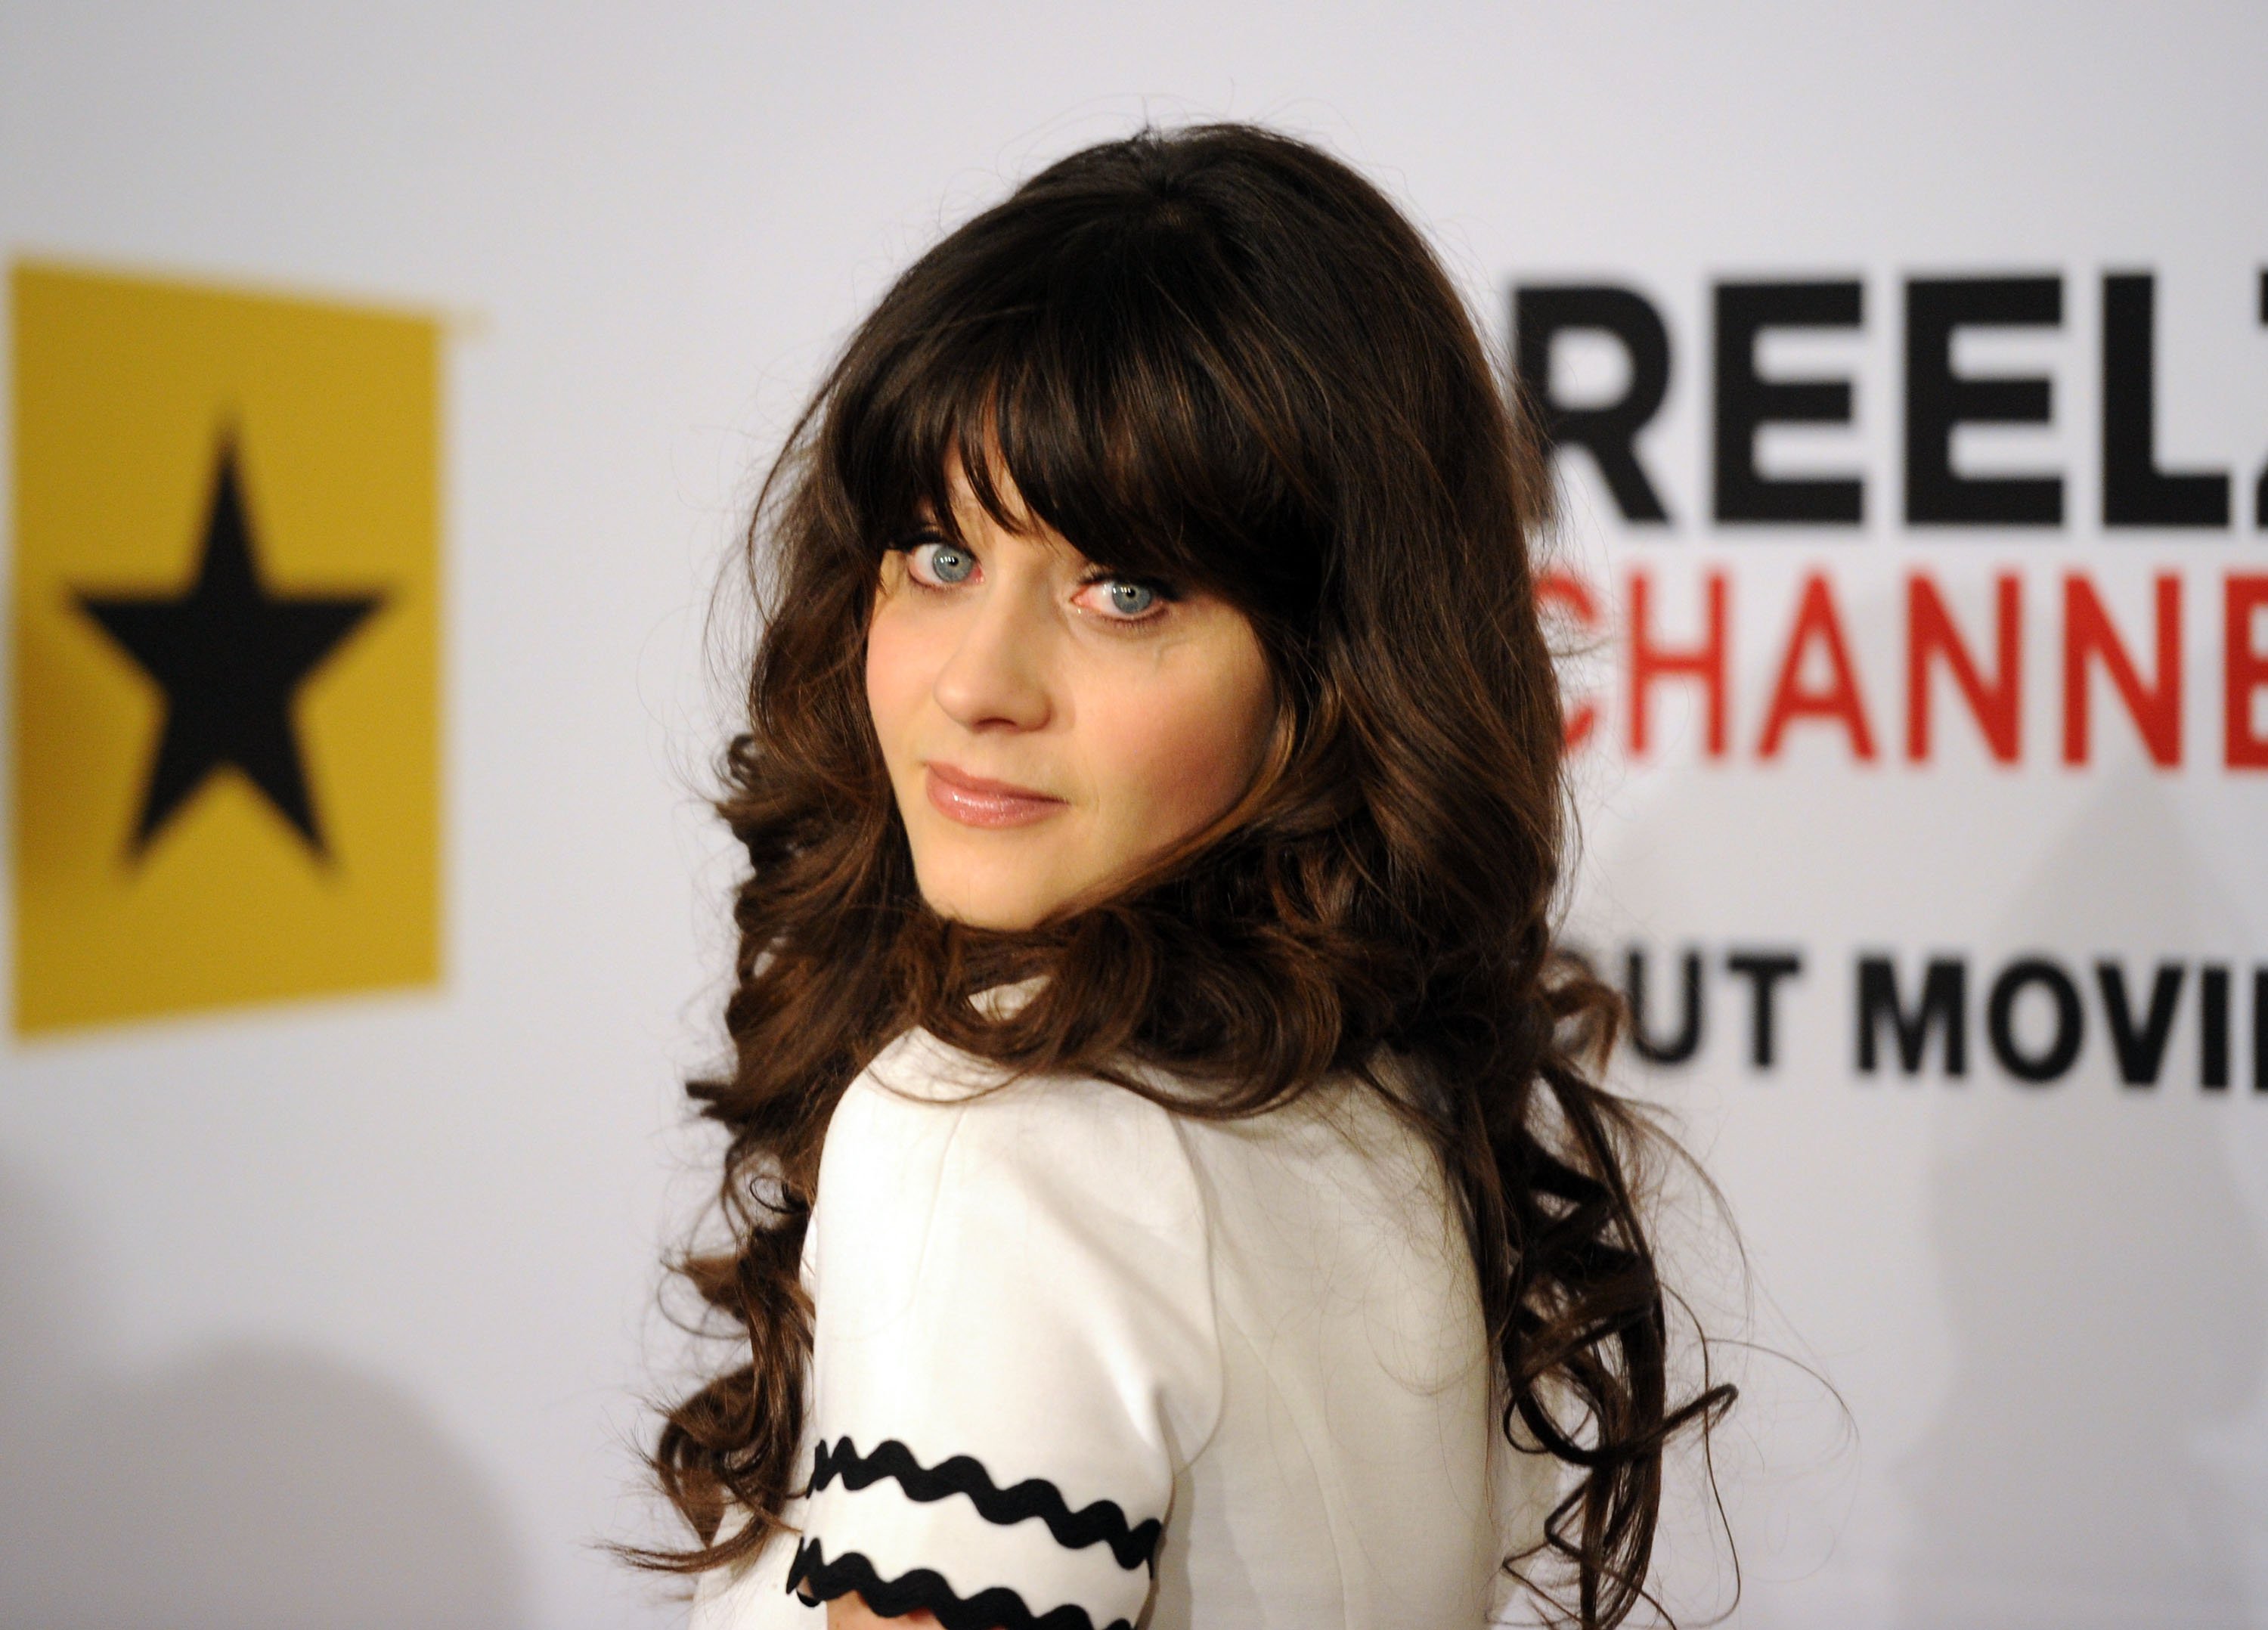 Zooey Deschanel poses for a photo on the red carpet